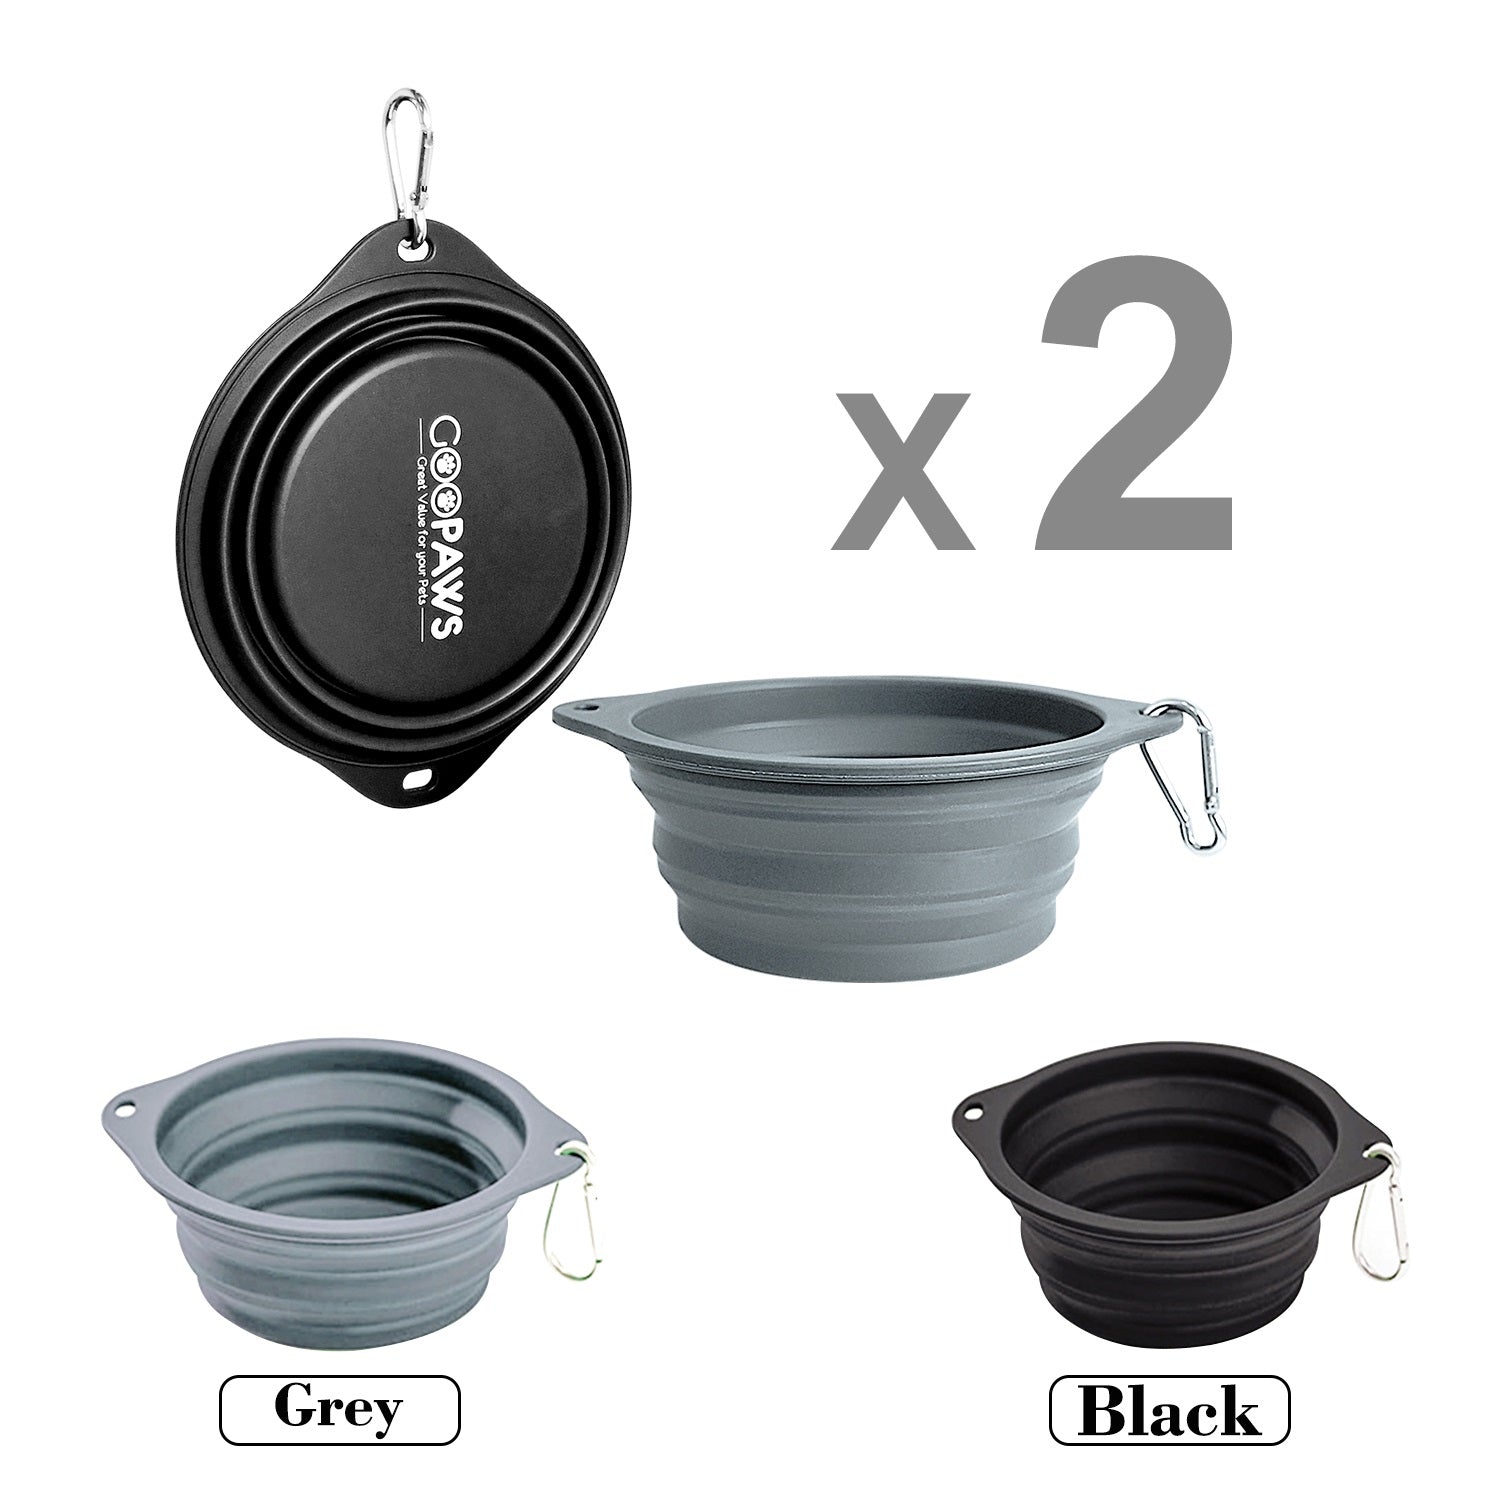 GOOPAWS 2 Pack Silicone Non-Skid Travel Dog and Cat Bowl, Black&Grey